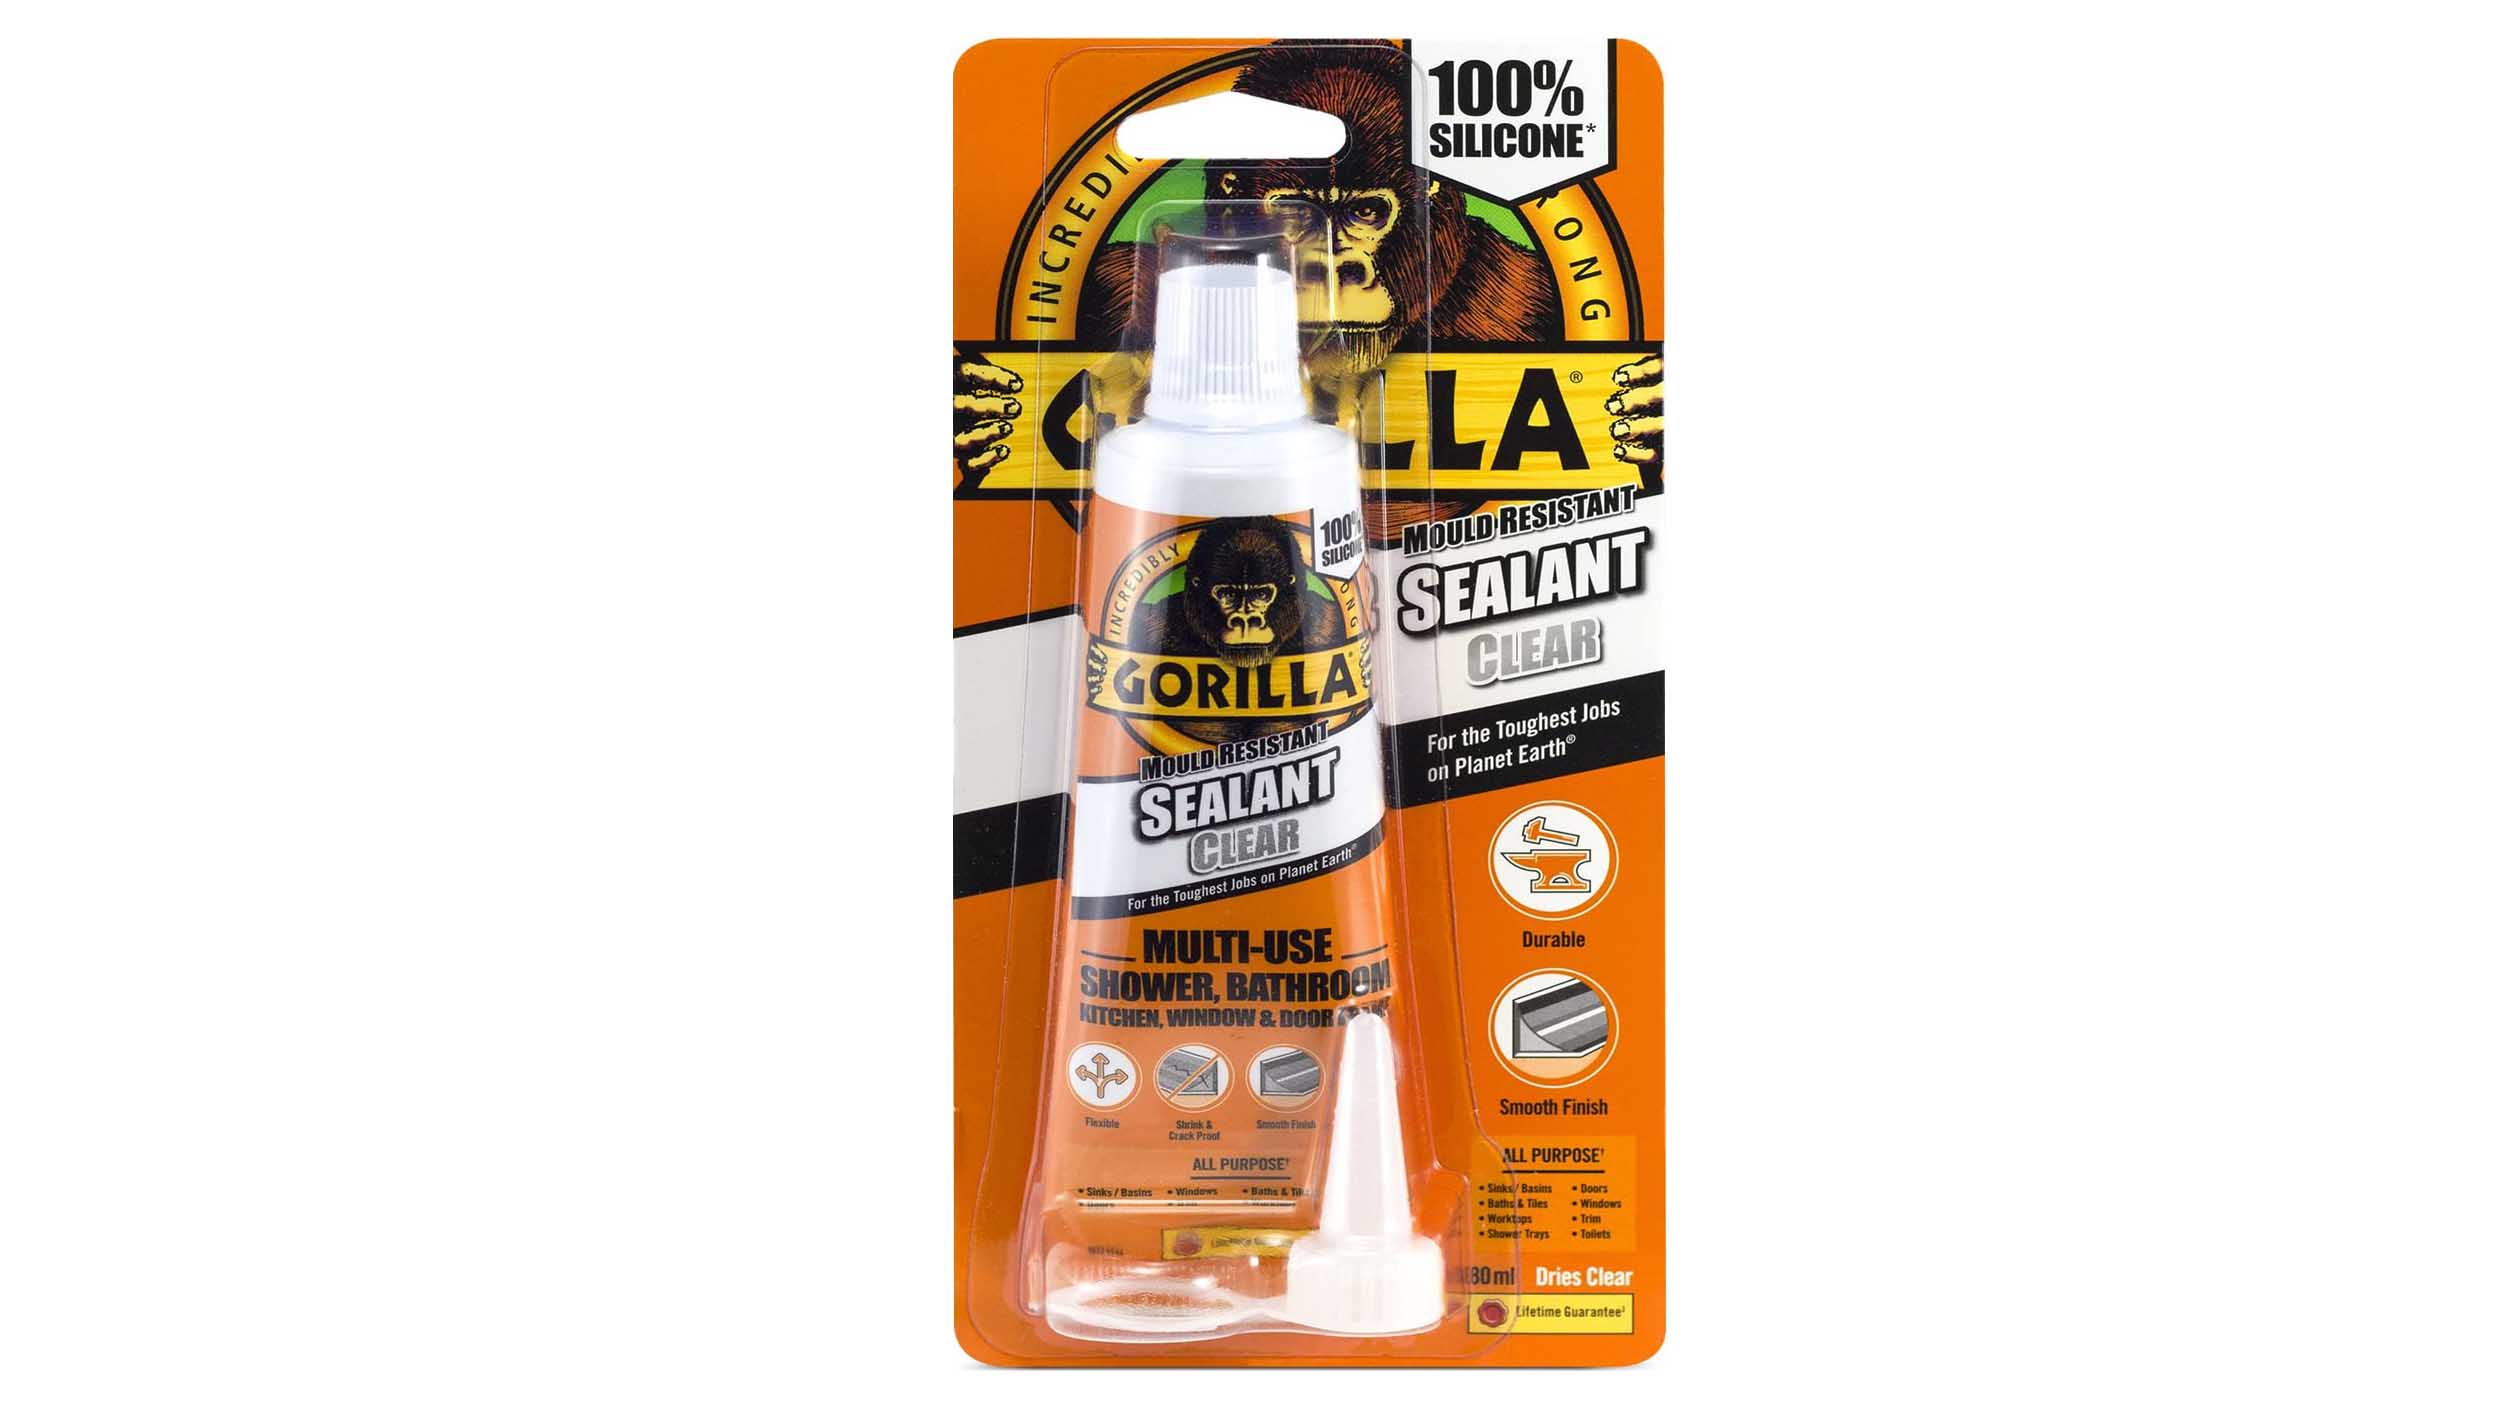 The Gorilla Glue Mould Resistant Sealant is one of the best bathroom sealants